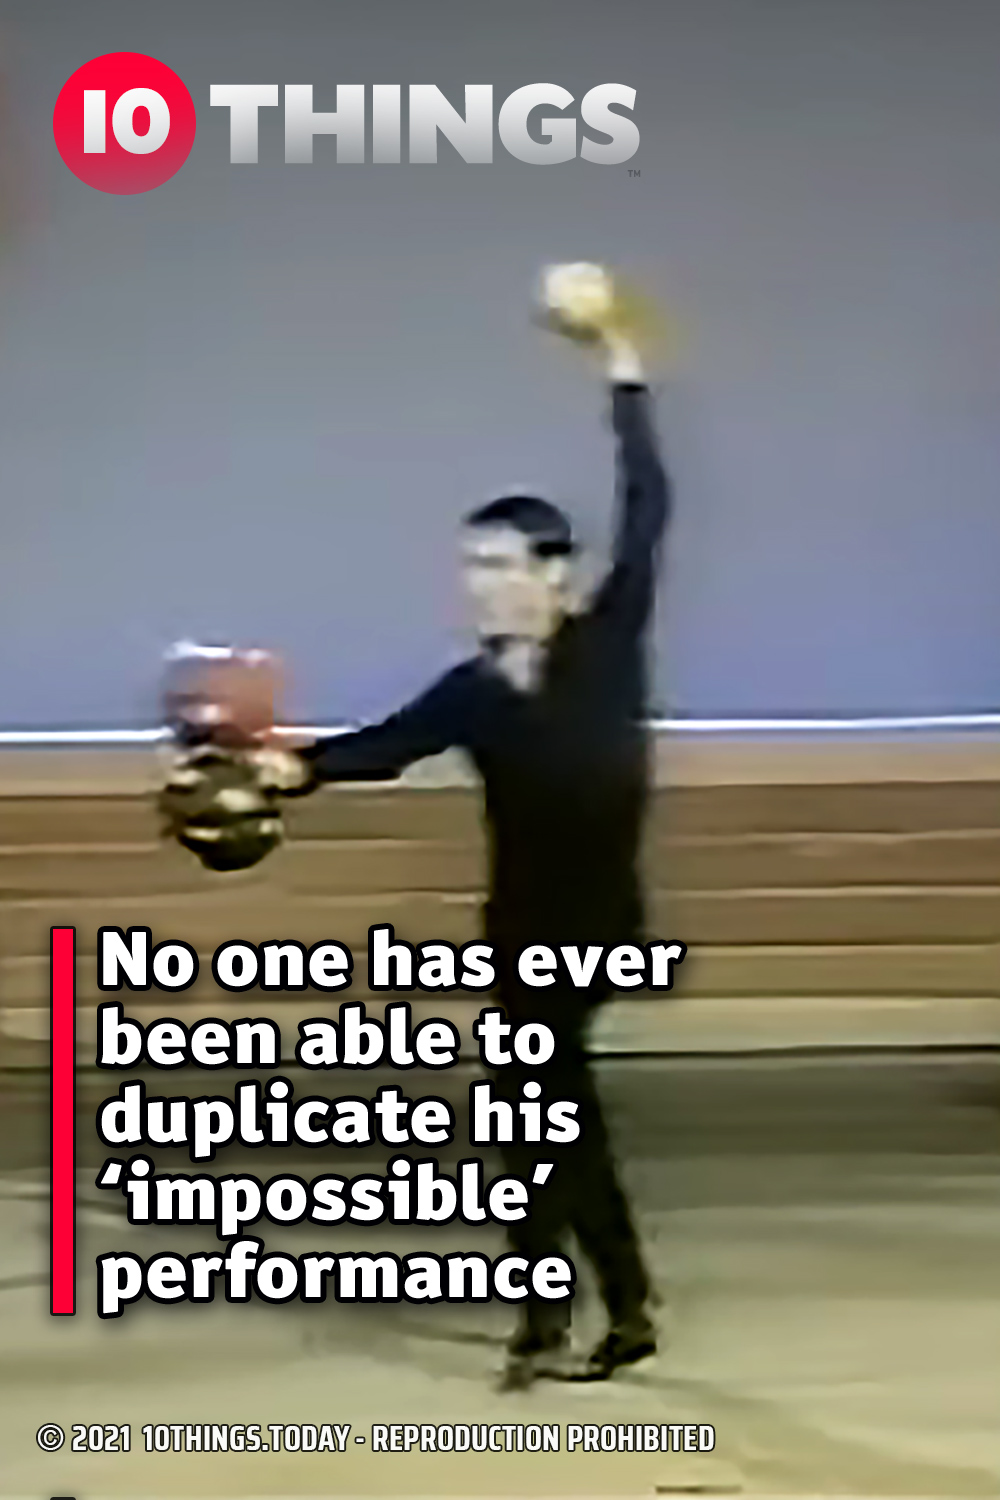 No one has ever been able to duplicate his ‘impossible’ performance